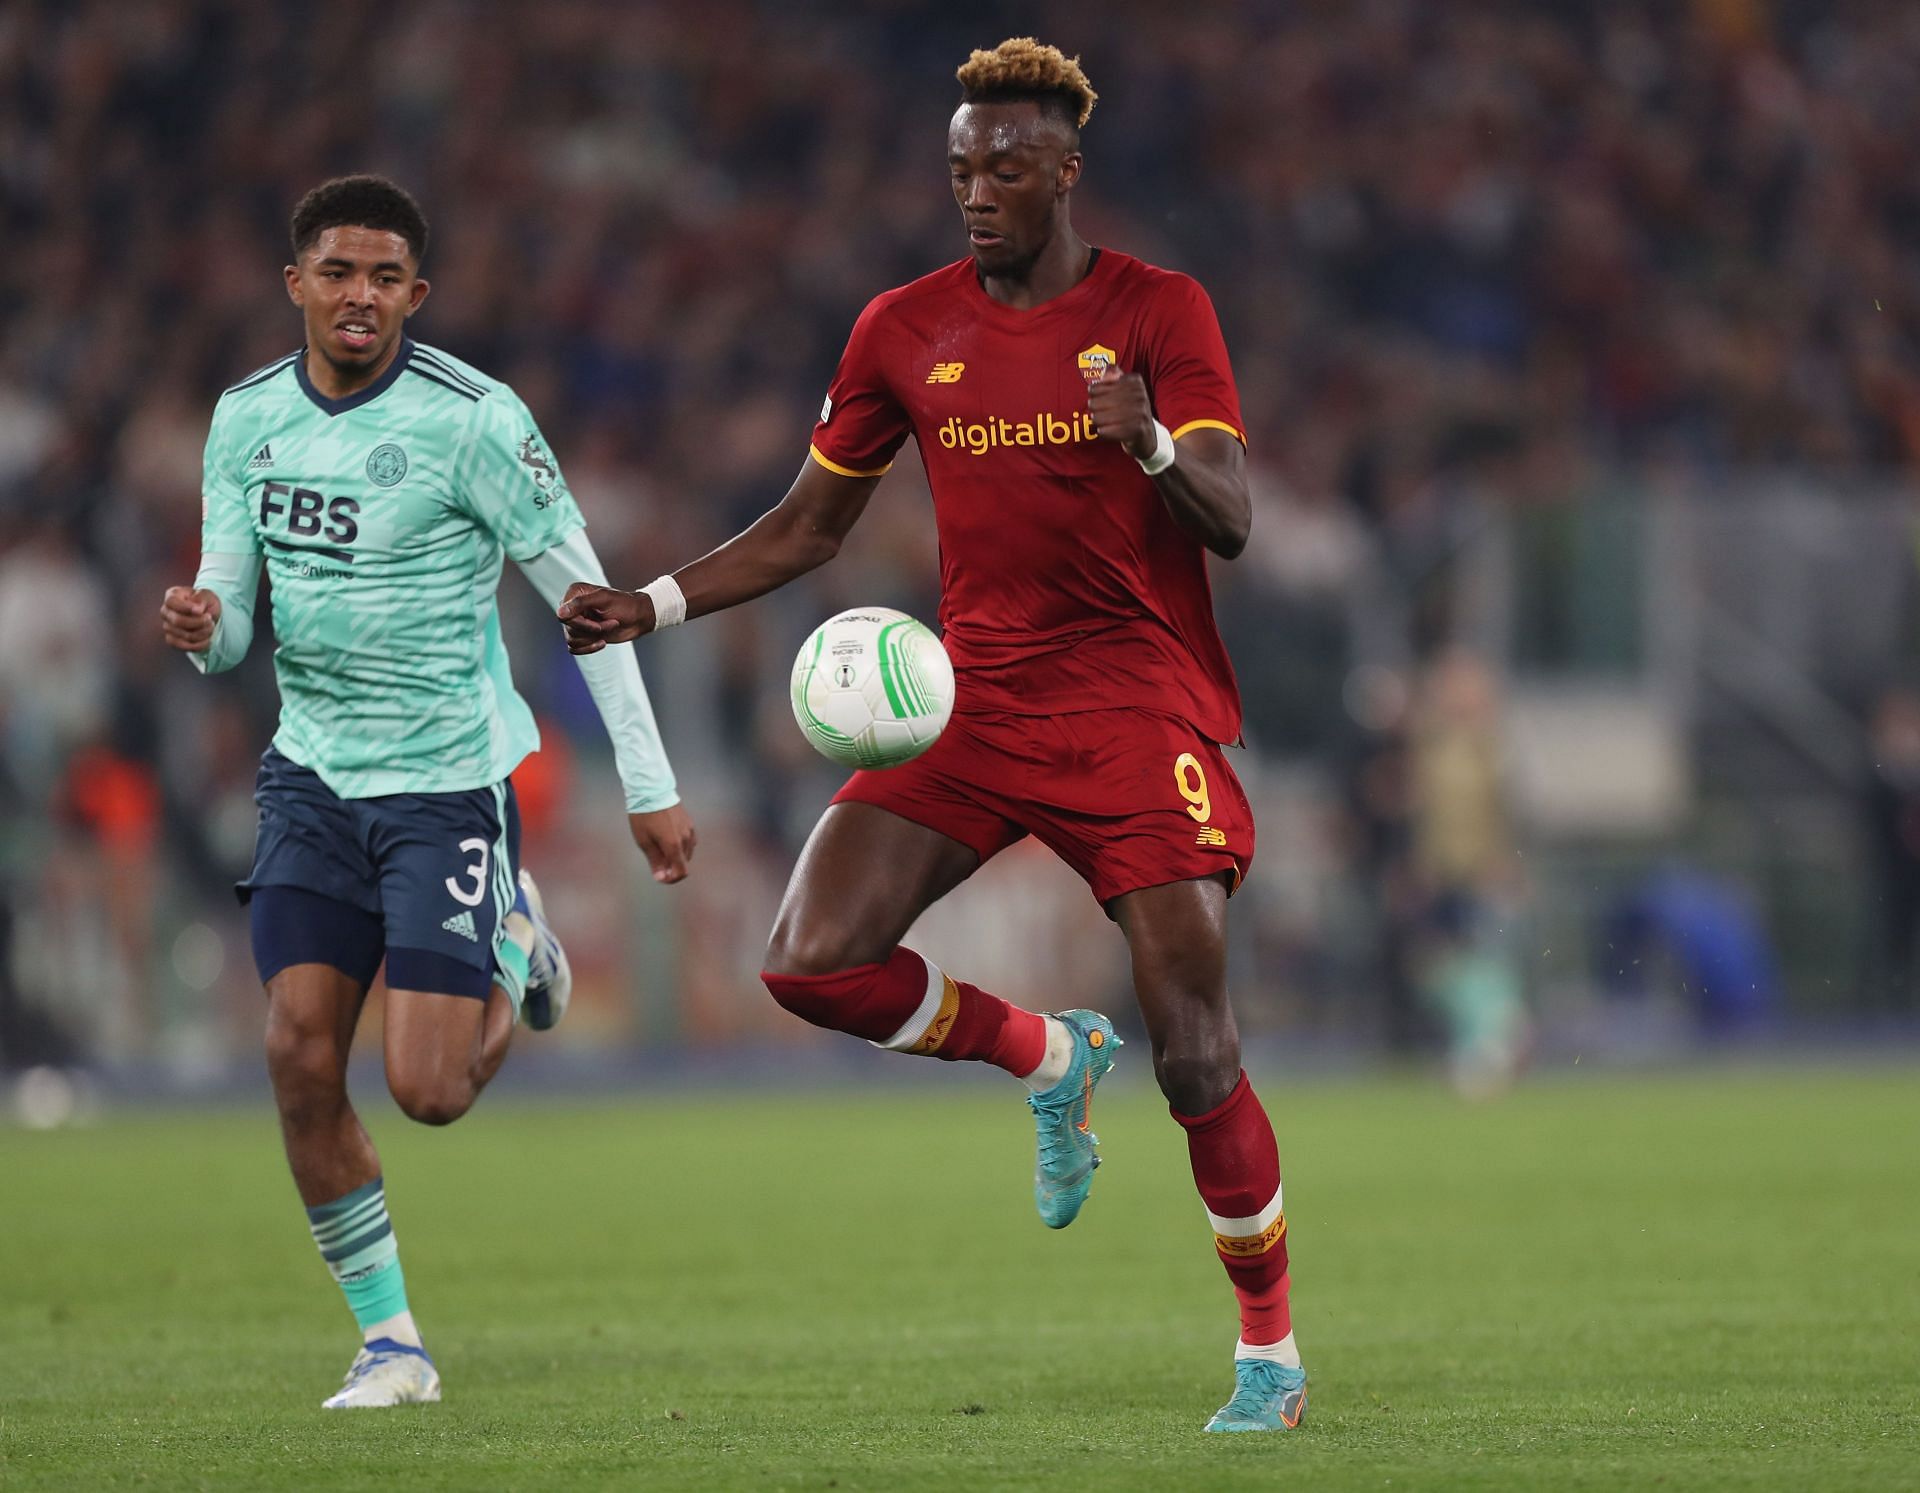 Tammy Abraham has been the star man for AS Roma this season